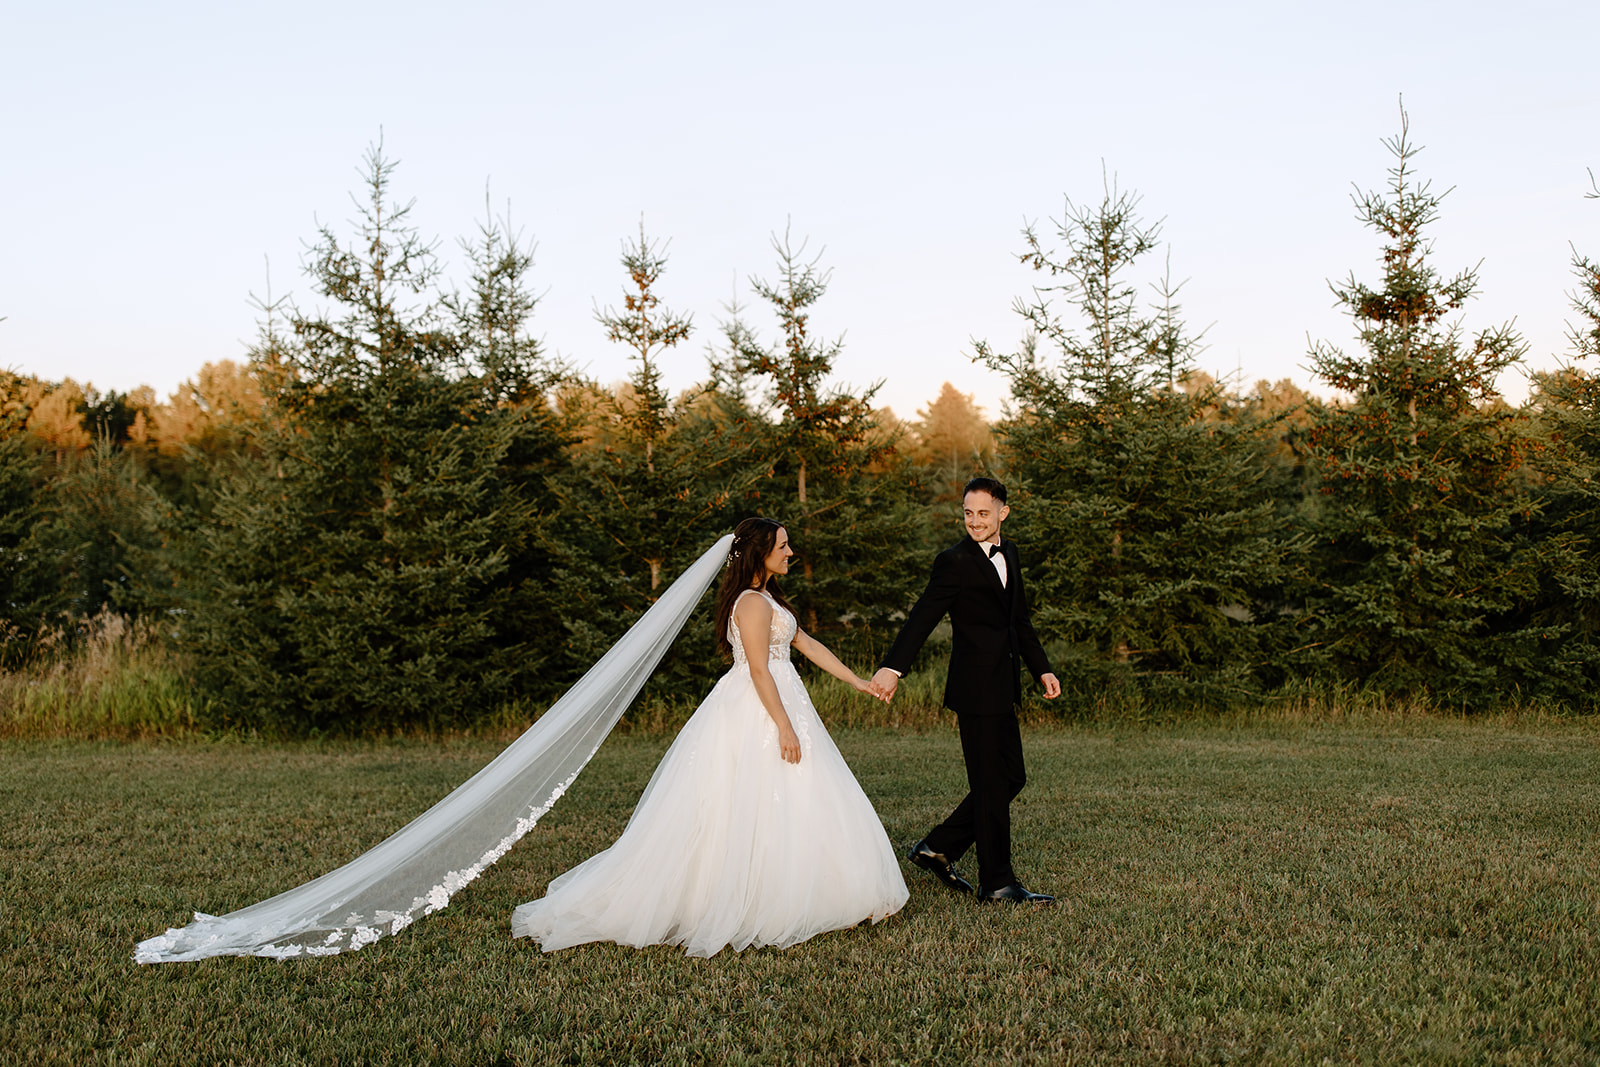 Groom leads his bride in front of a row of trees